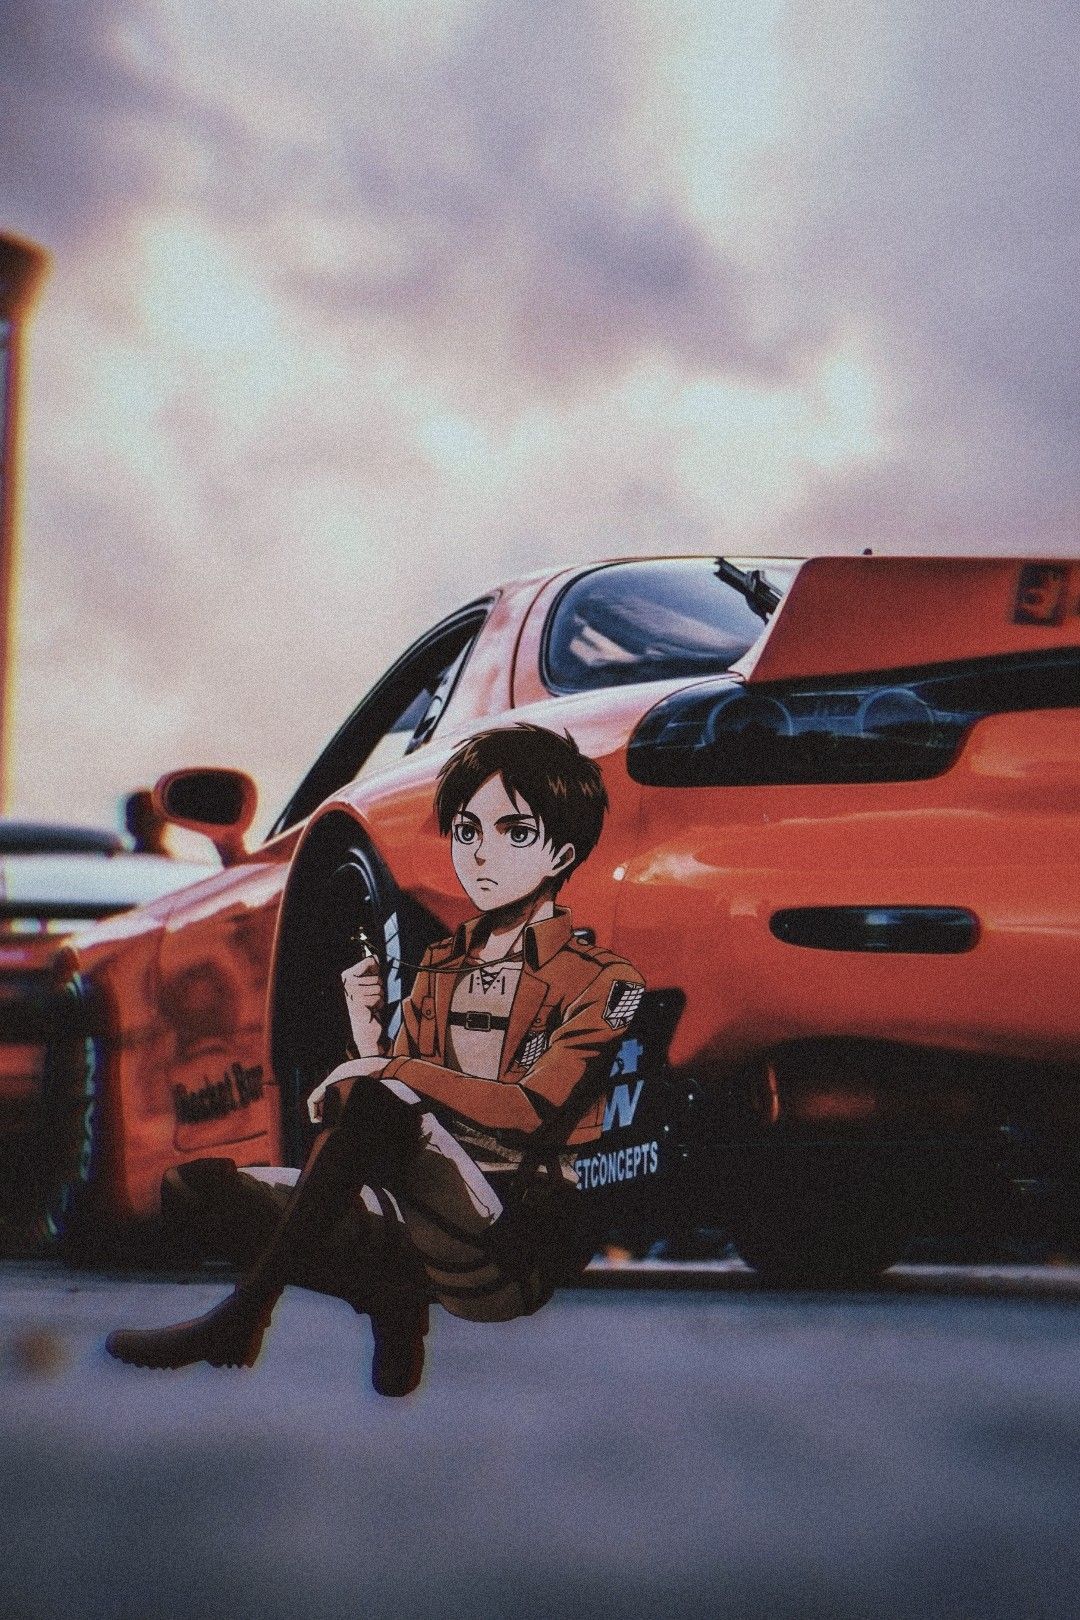 A Collection of JDM X ANIME WALLPAPER MADE BY ME. em 2021. Animes wallpaper, Personagens de anime, Wallpaper